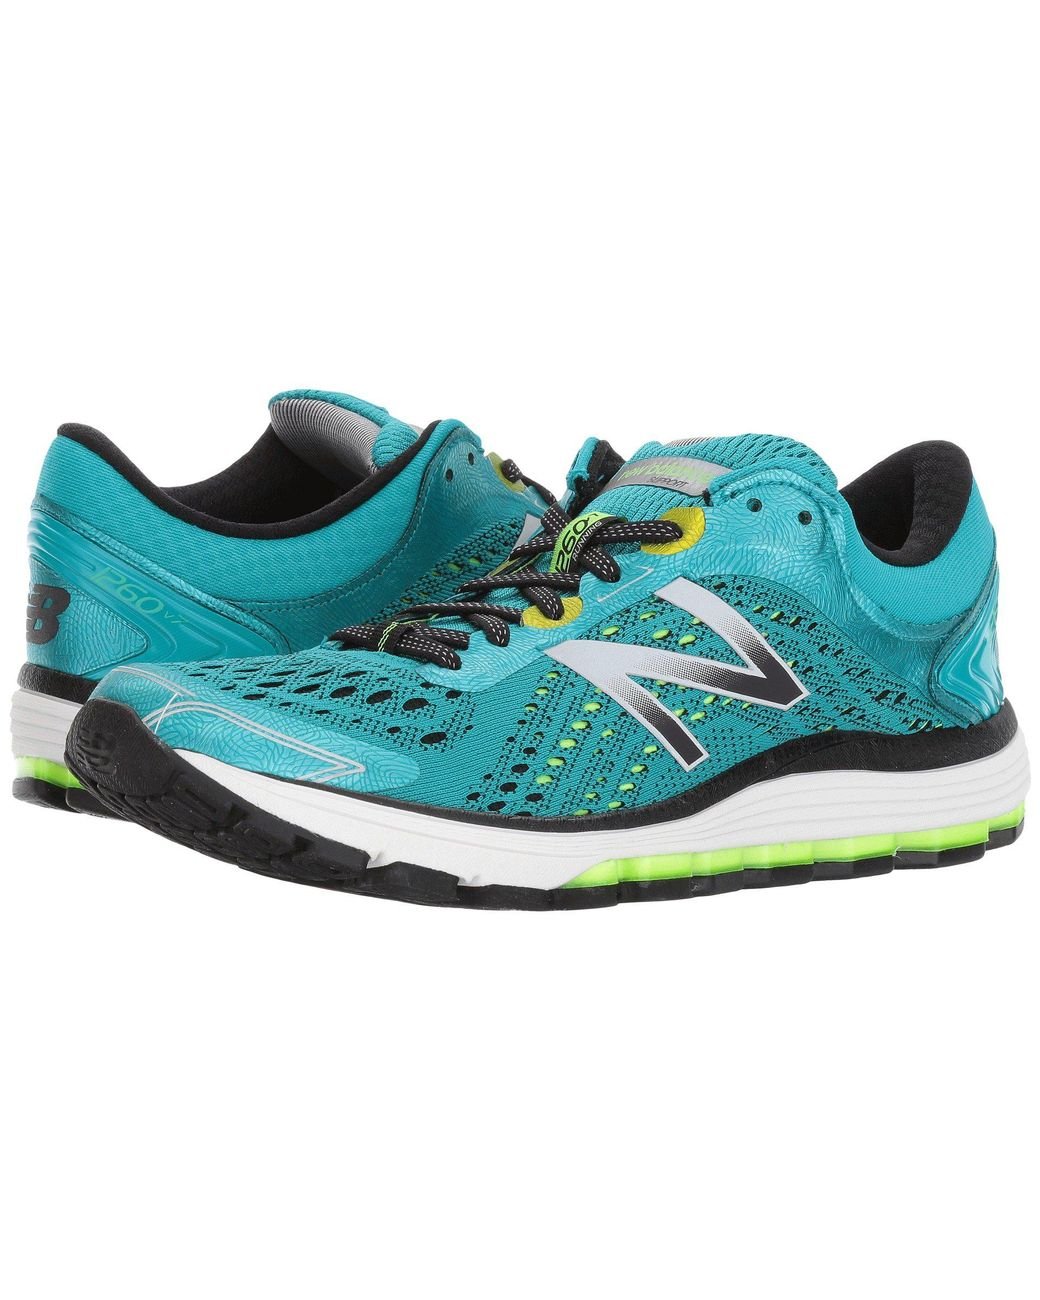 New Balance Synthetic 1260 V7 (polaris/pigment) Women's Running Shoes | Lyst